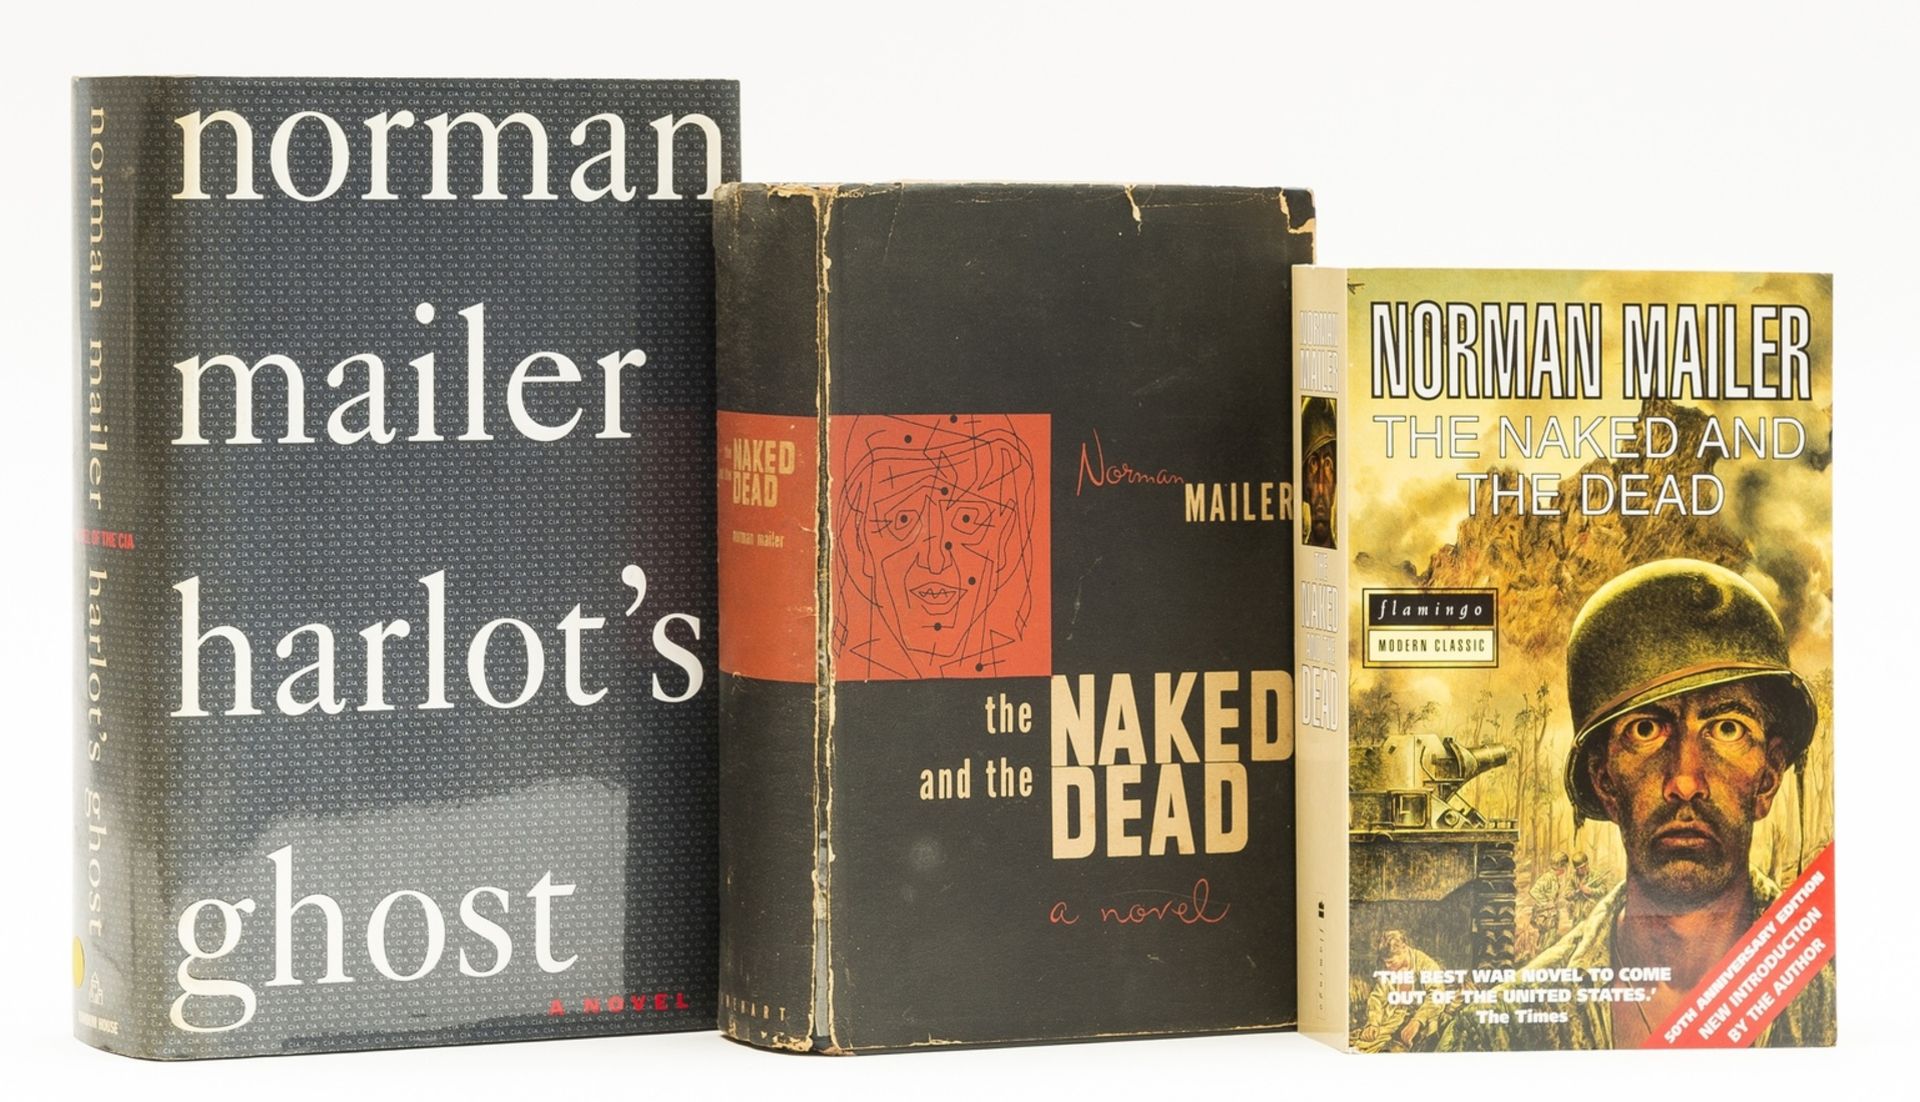 Mailer (Norman) The Naked and the Dead, first edition, 1948; and 2 others by the same, some with … - Image 2 of 2